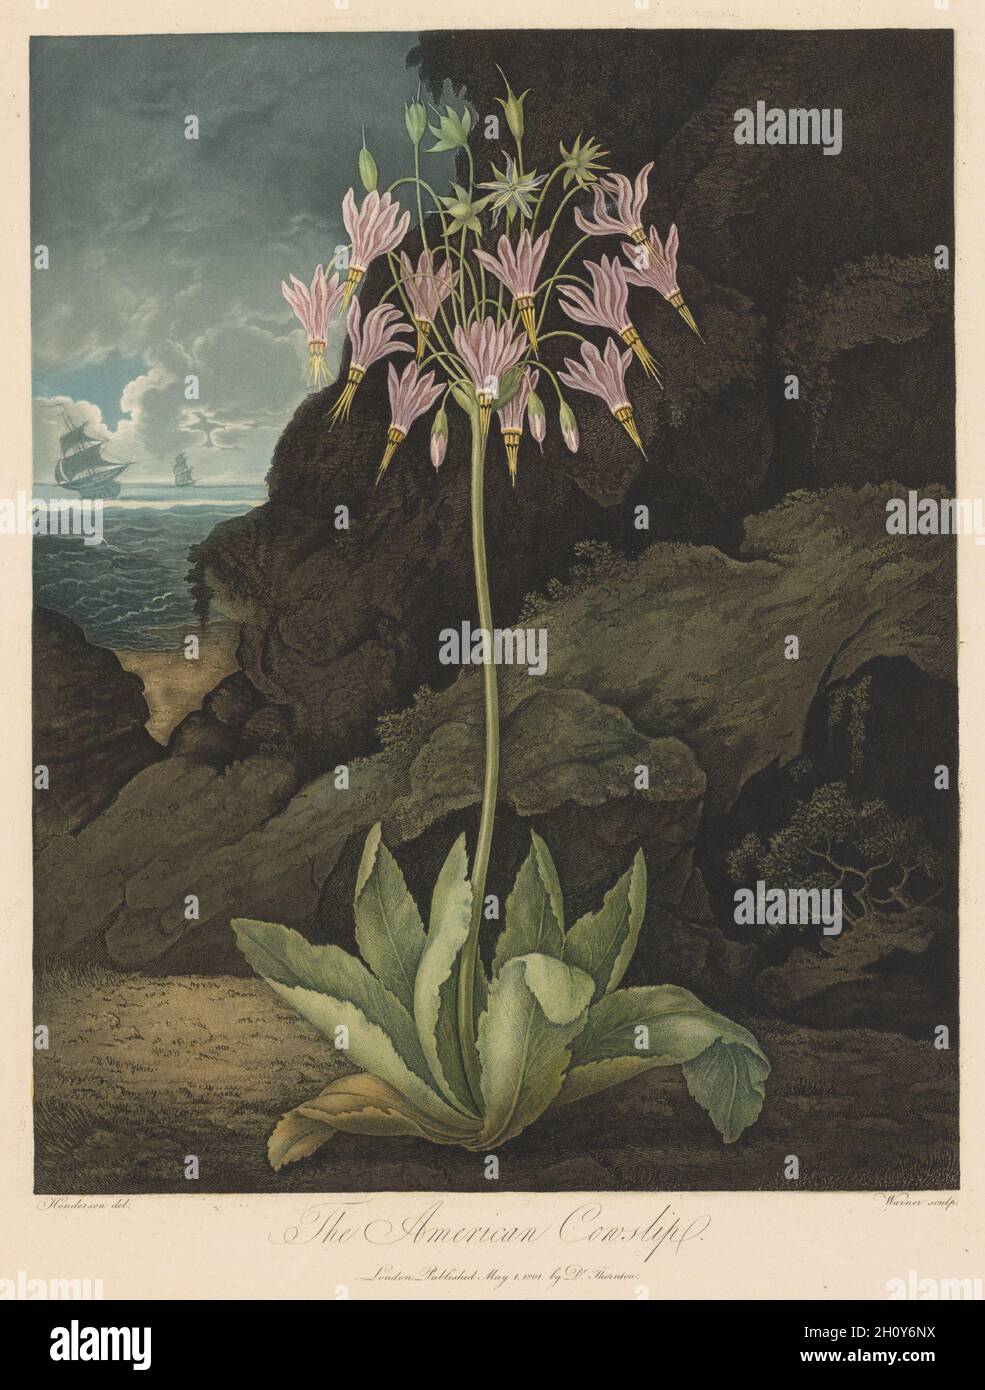 The Temple of Flora, or Garden of Nature: The American Cowslip, 1801. Robert John Thornton (British, 1768-1837). Aquatint, stipple and line engraving; Stock Photo